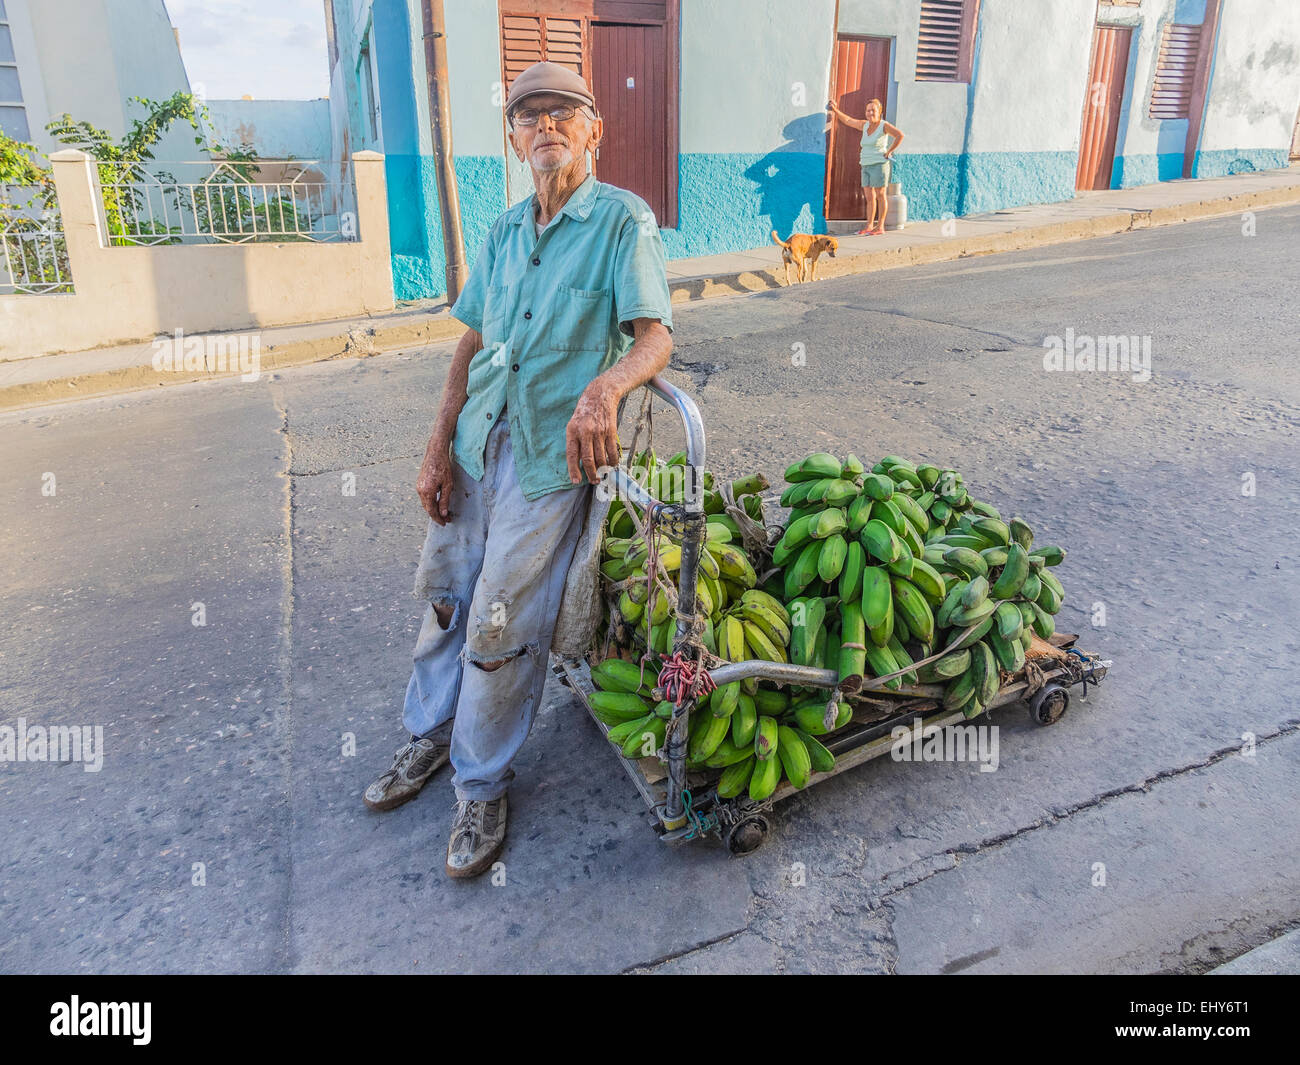 An old Hispanic man pulls his 4-wheeled cart loaded with green plantains through the streets of Santiago de Cuba. Stock Photo